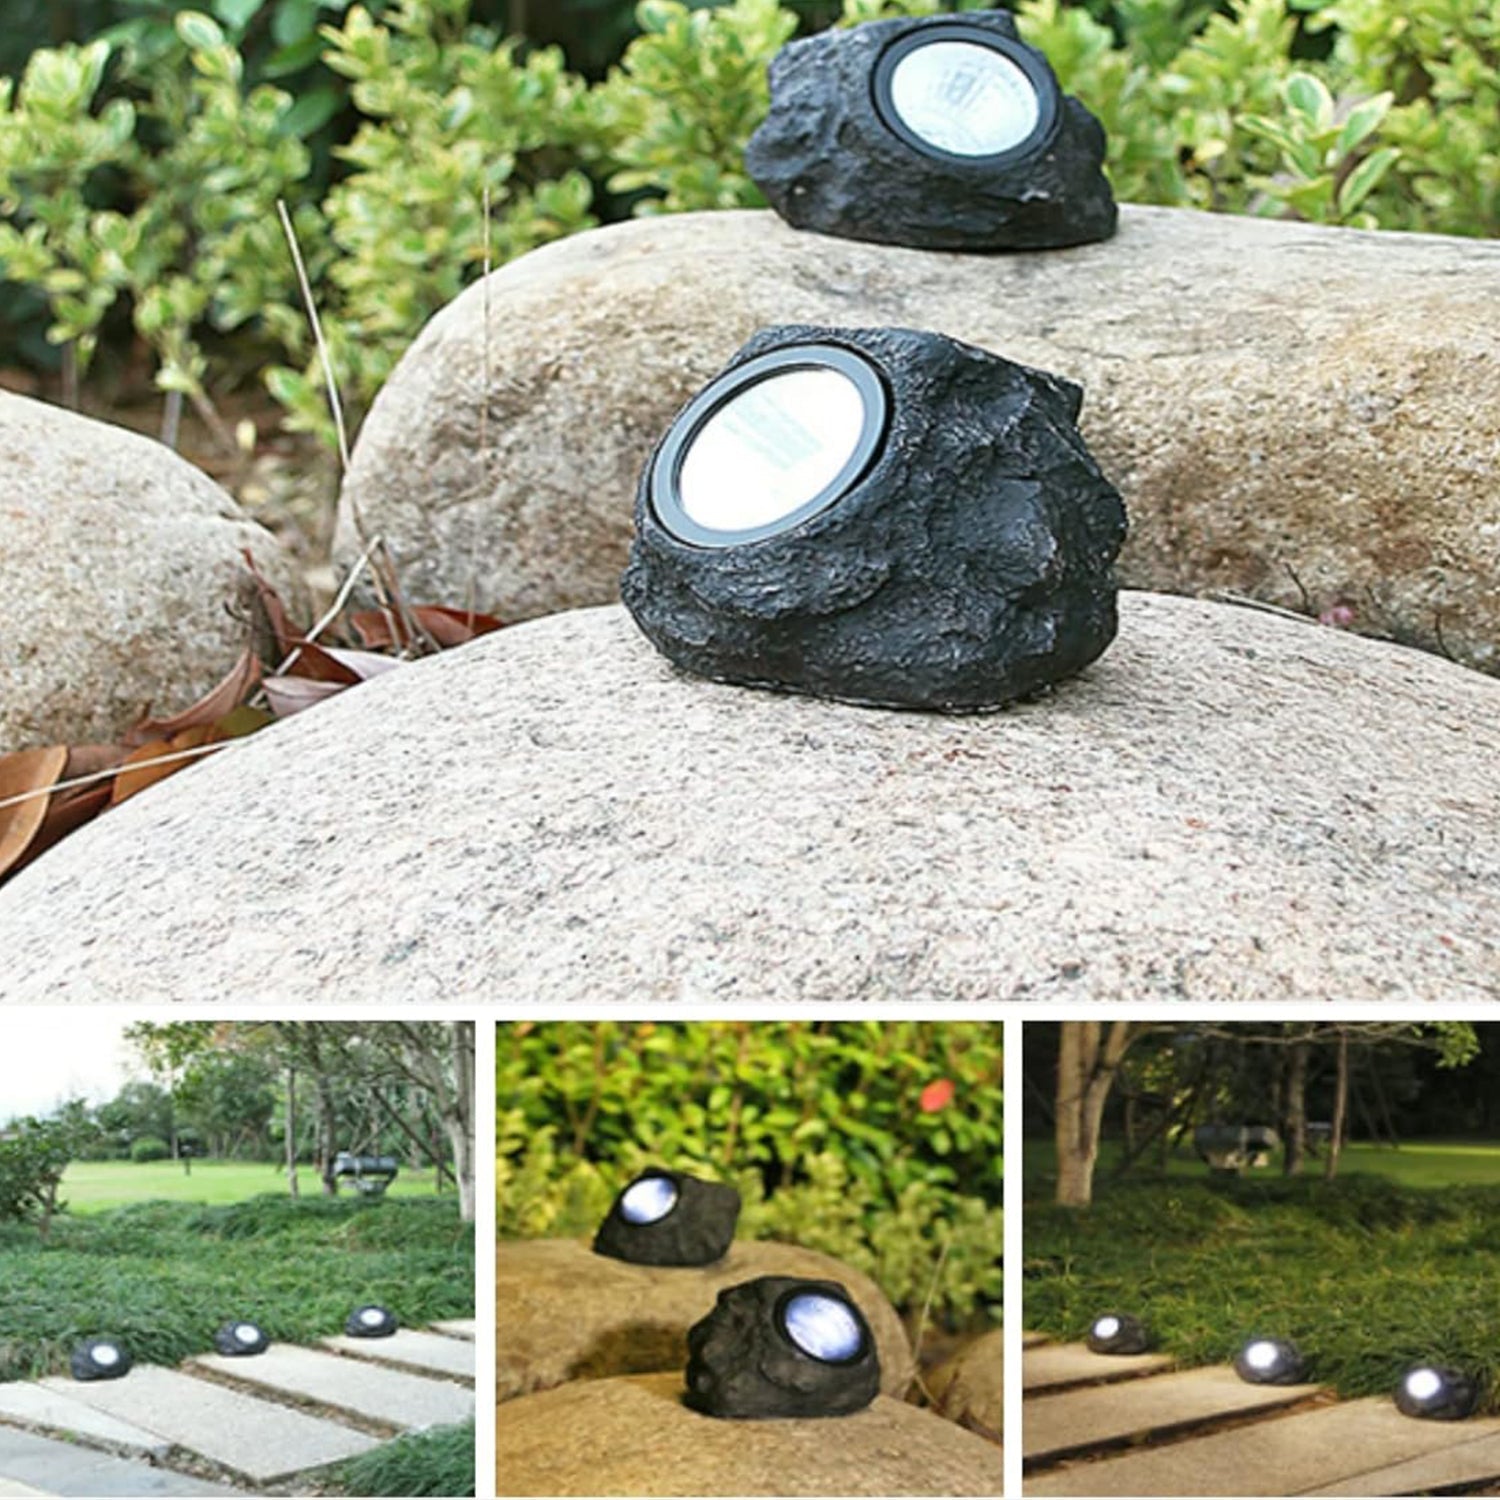 Solar-powered LED rock light for outdoor pathways and gardens (1 piece)